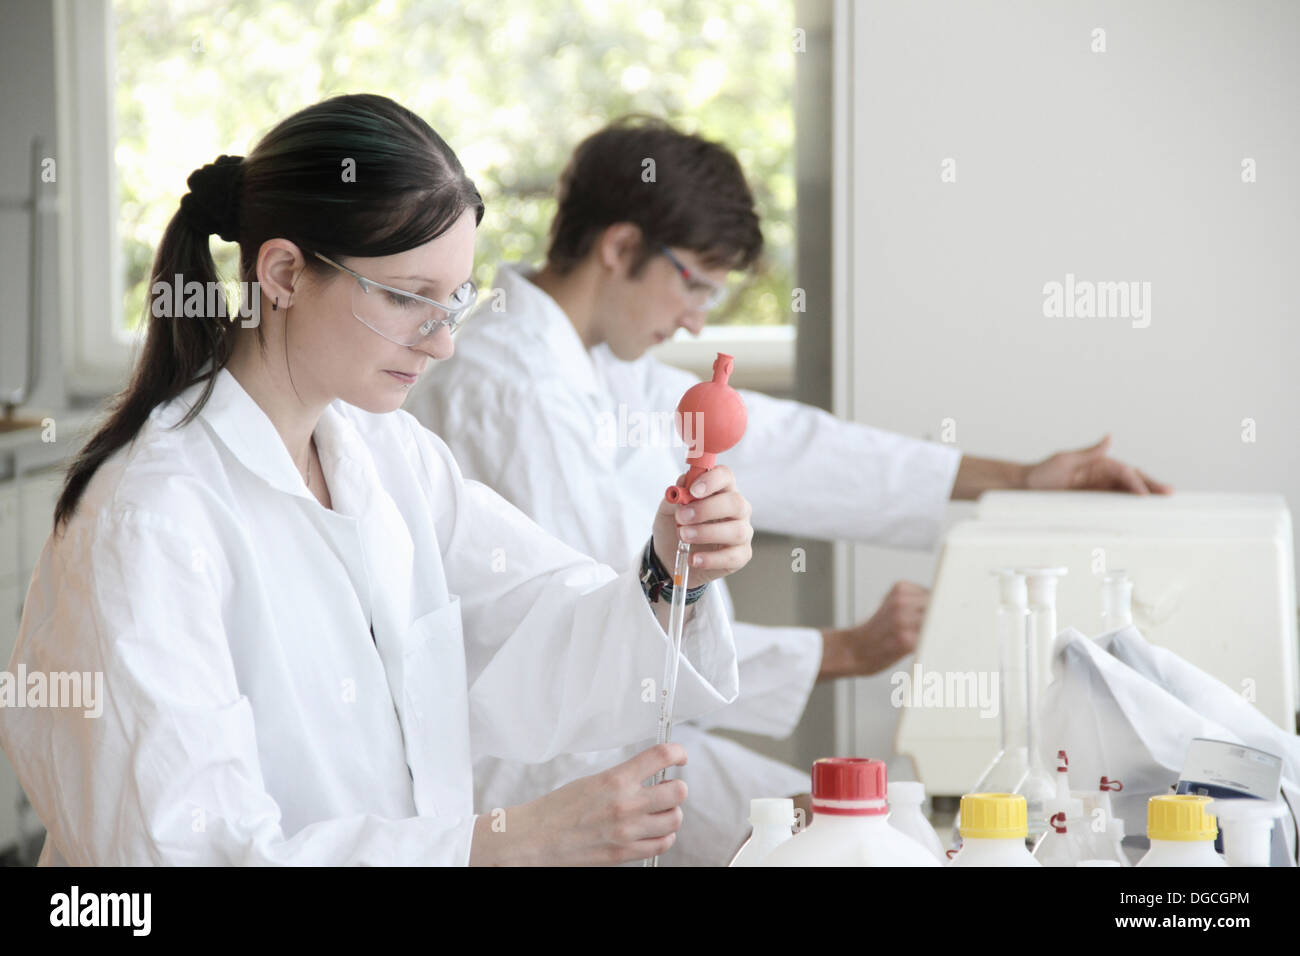 Chemistry students at work in lab Stock Photo